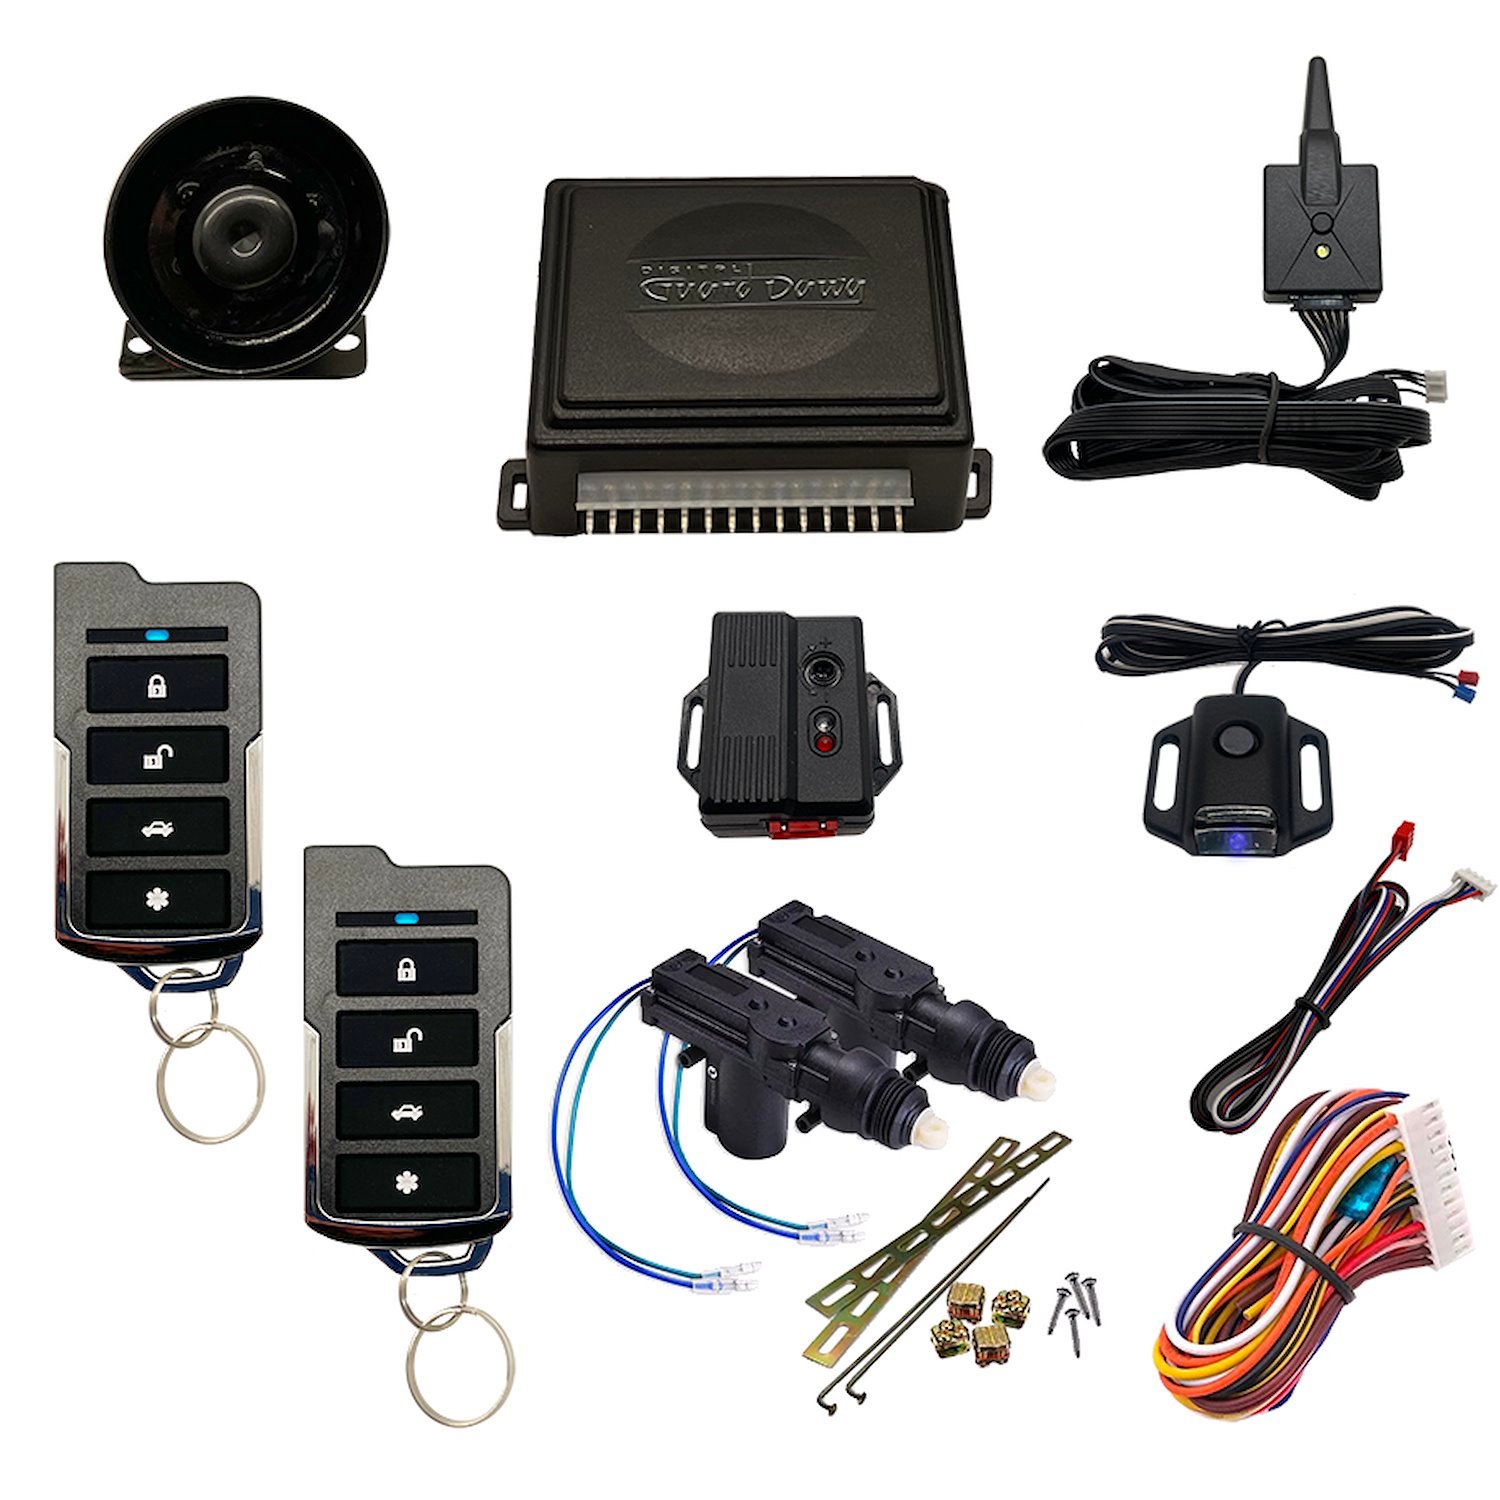 DGD-KY-ALM-1 Remote Keyless Entry and Alarm System, 1-Way